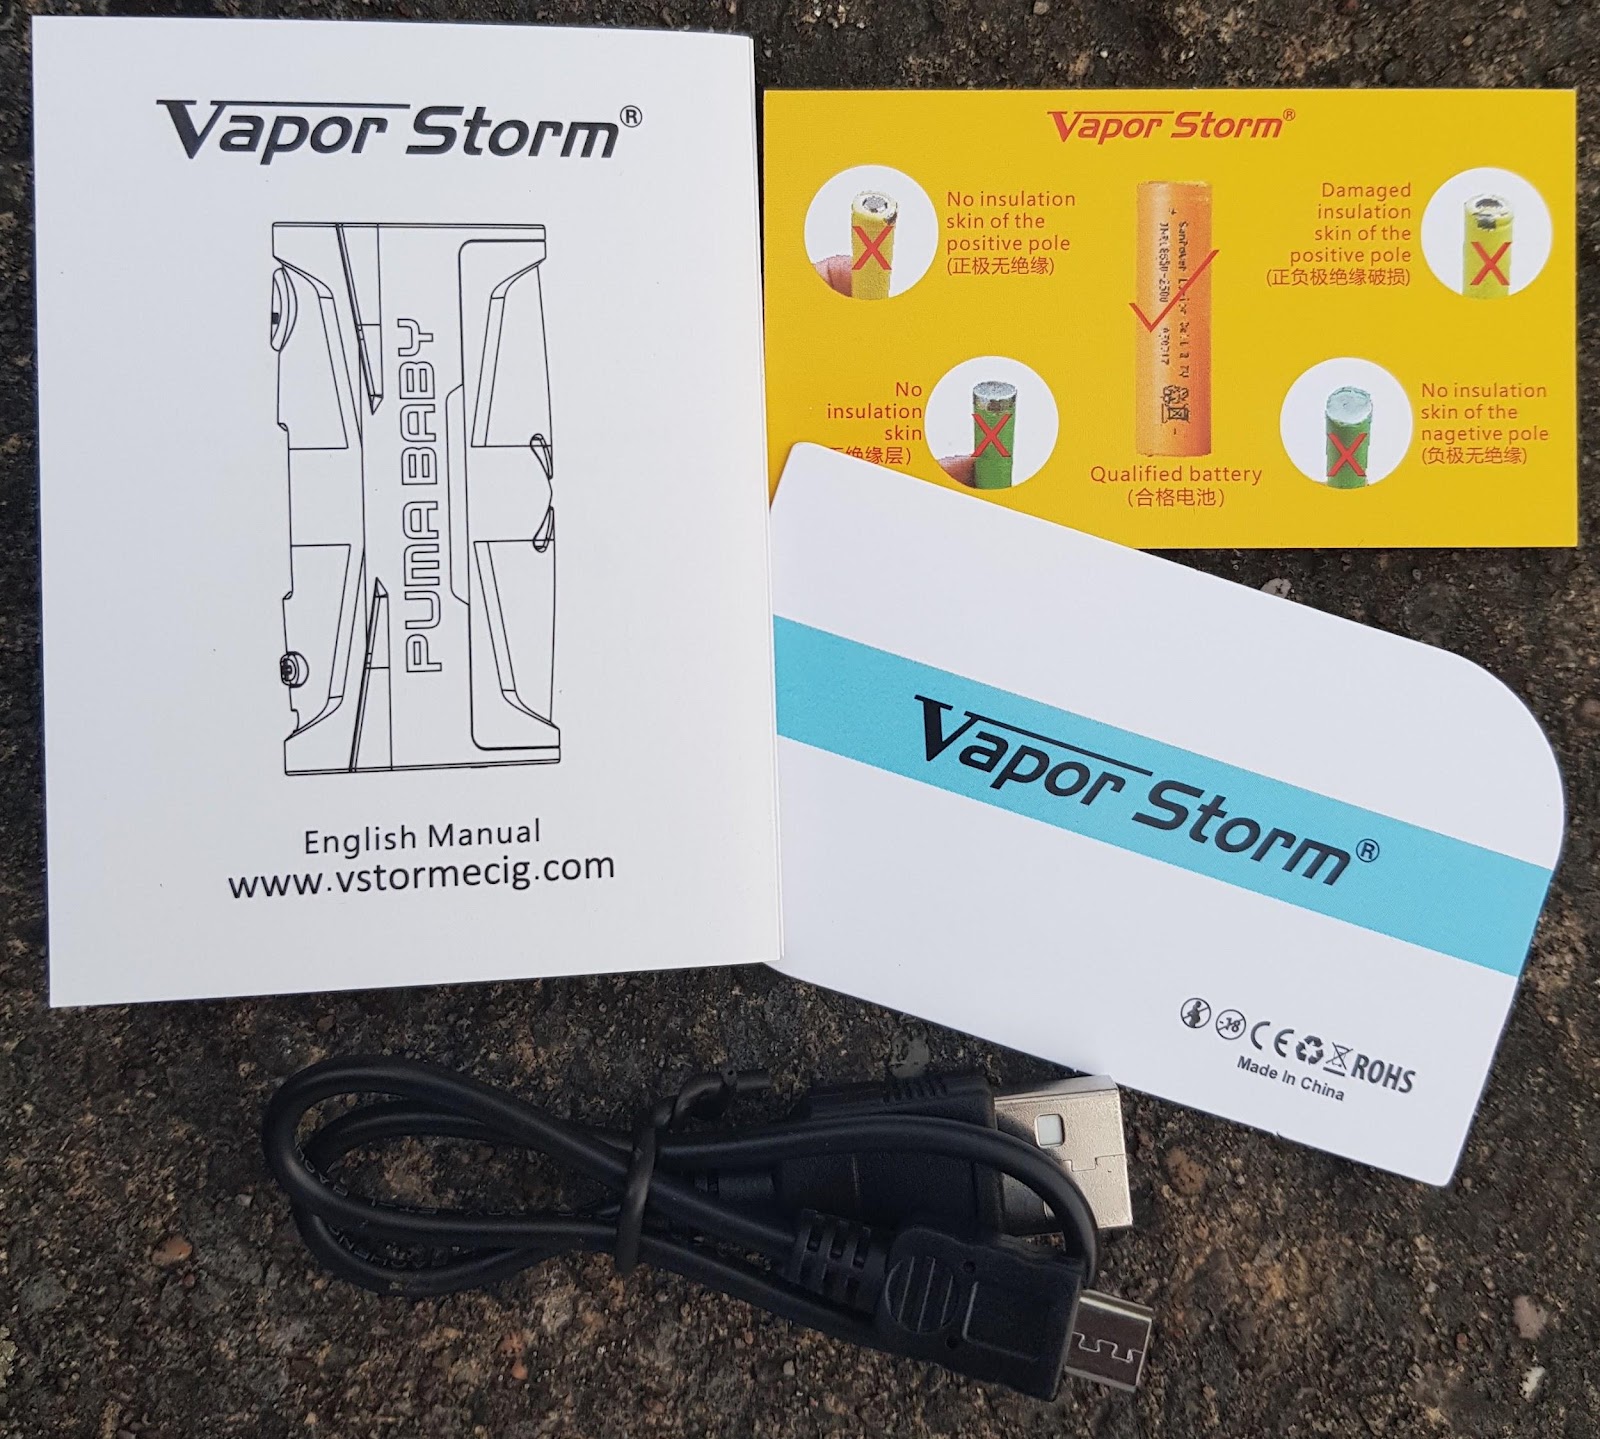 Puma Baby Mod by Vapor Storm Review | Planet of the Vapes